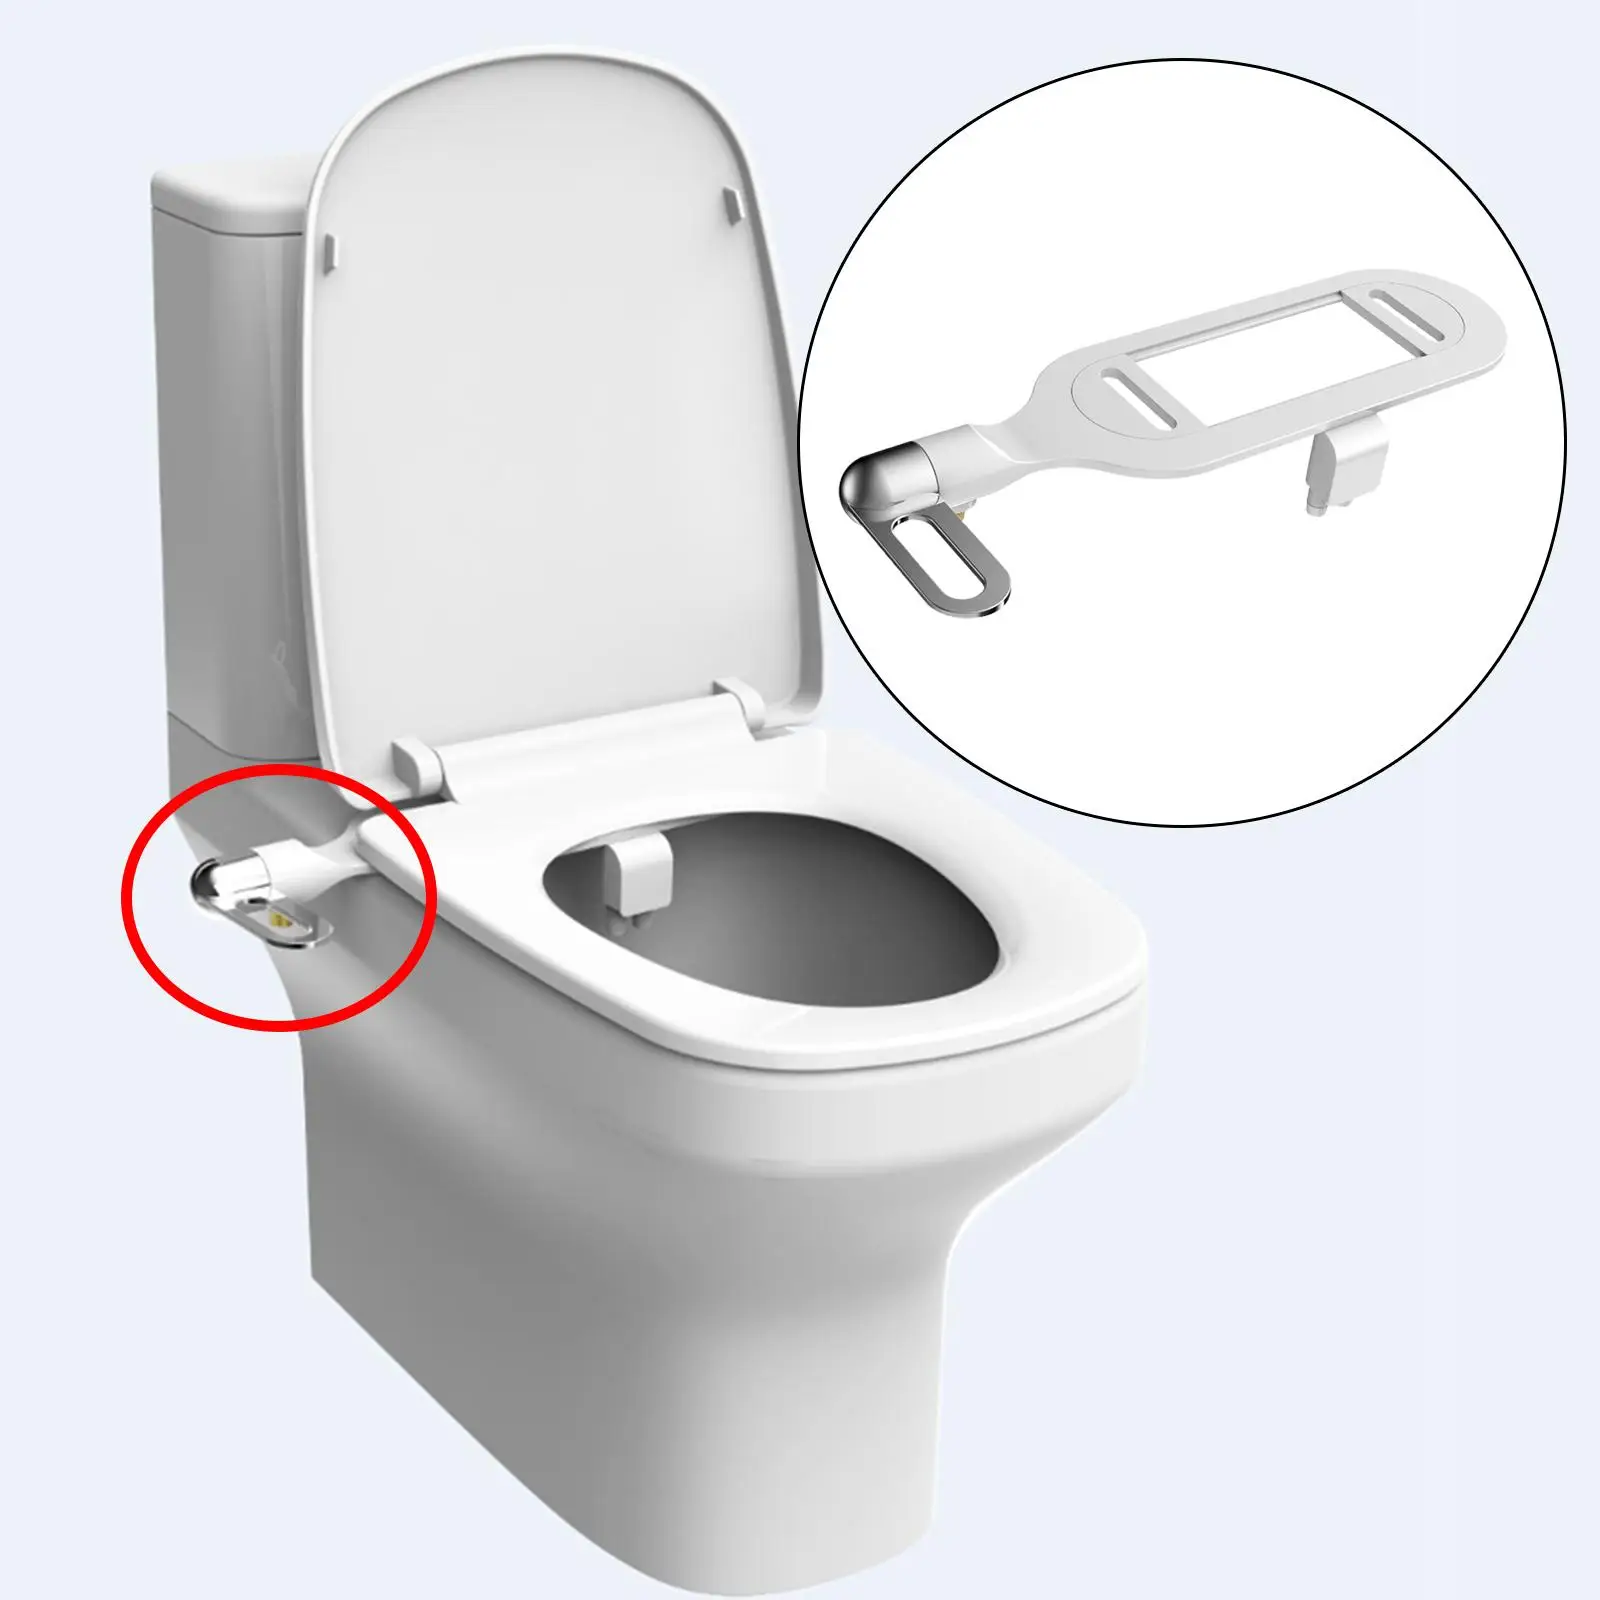 Universal Bidet Toilet Seat Attachment Easy Installation Front Rear Wash Easy to Use Washing Artifact for Accessories